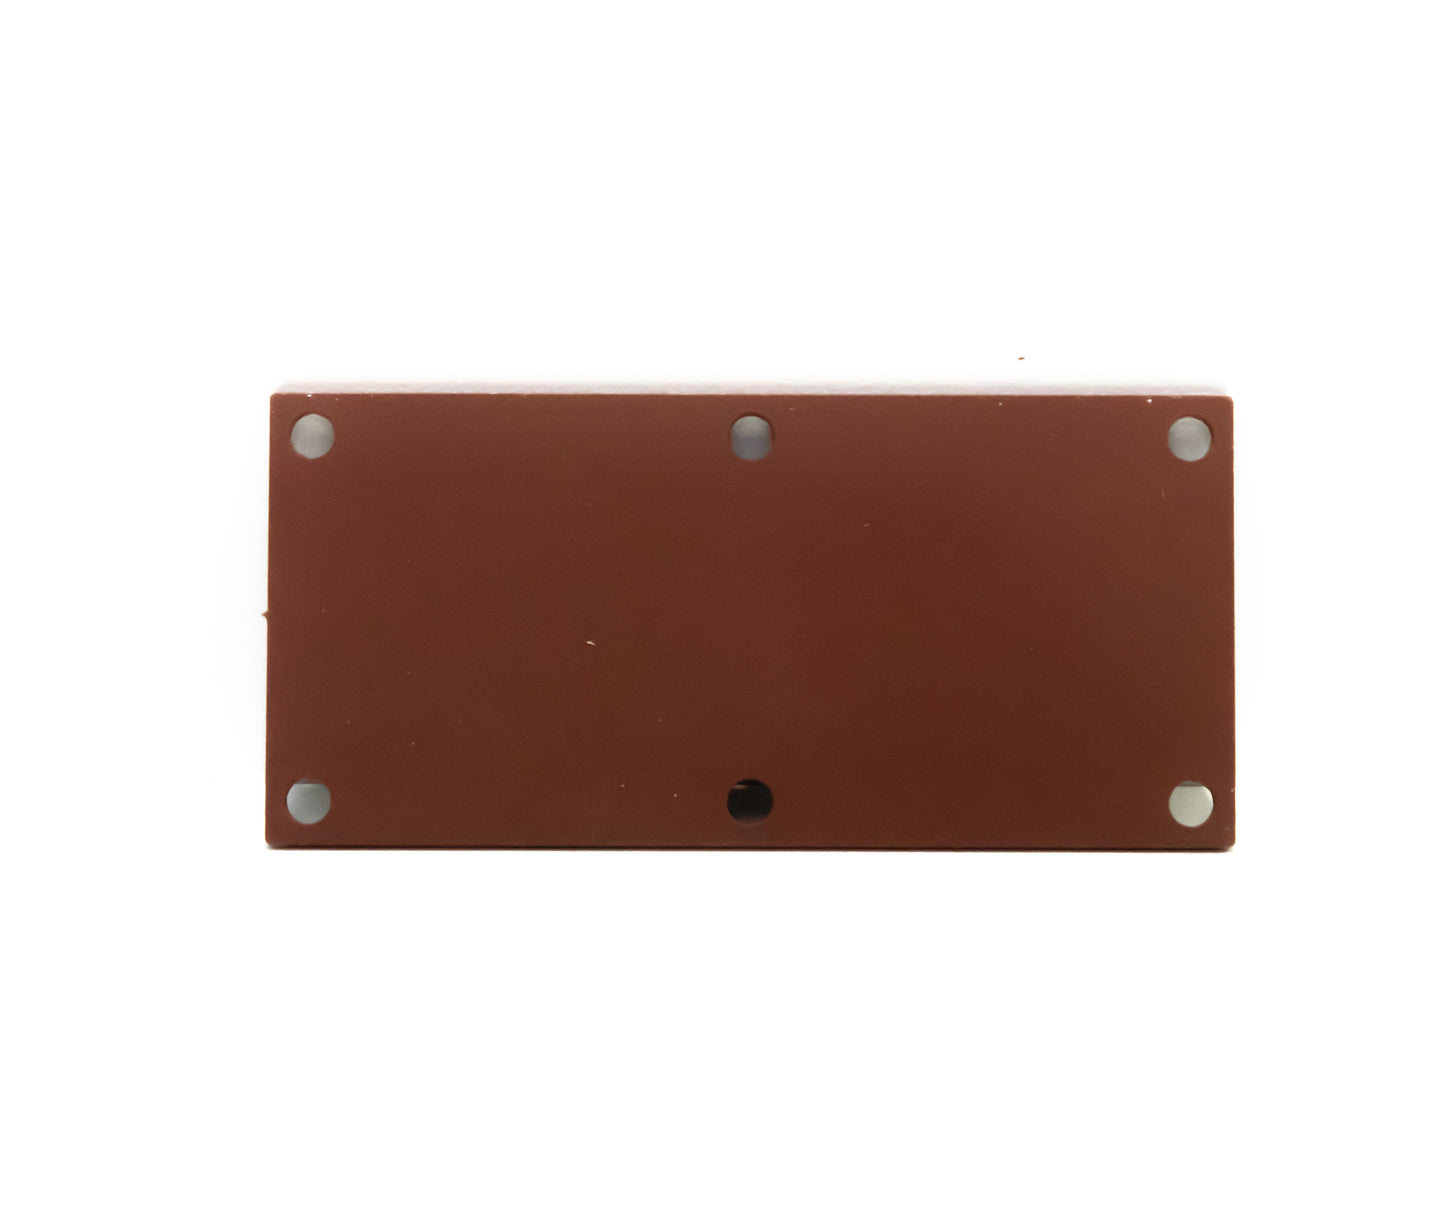 Cover Plate for the Brake/Clutch Pedal Tower